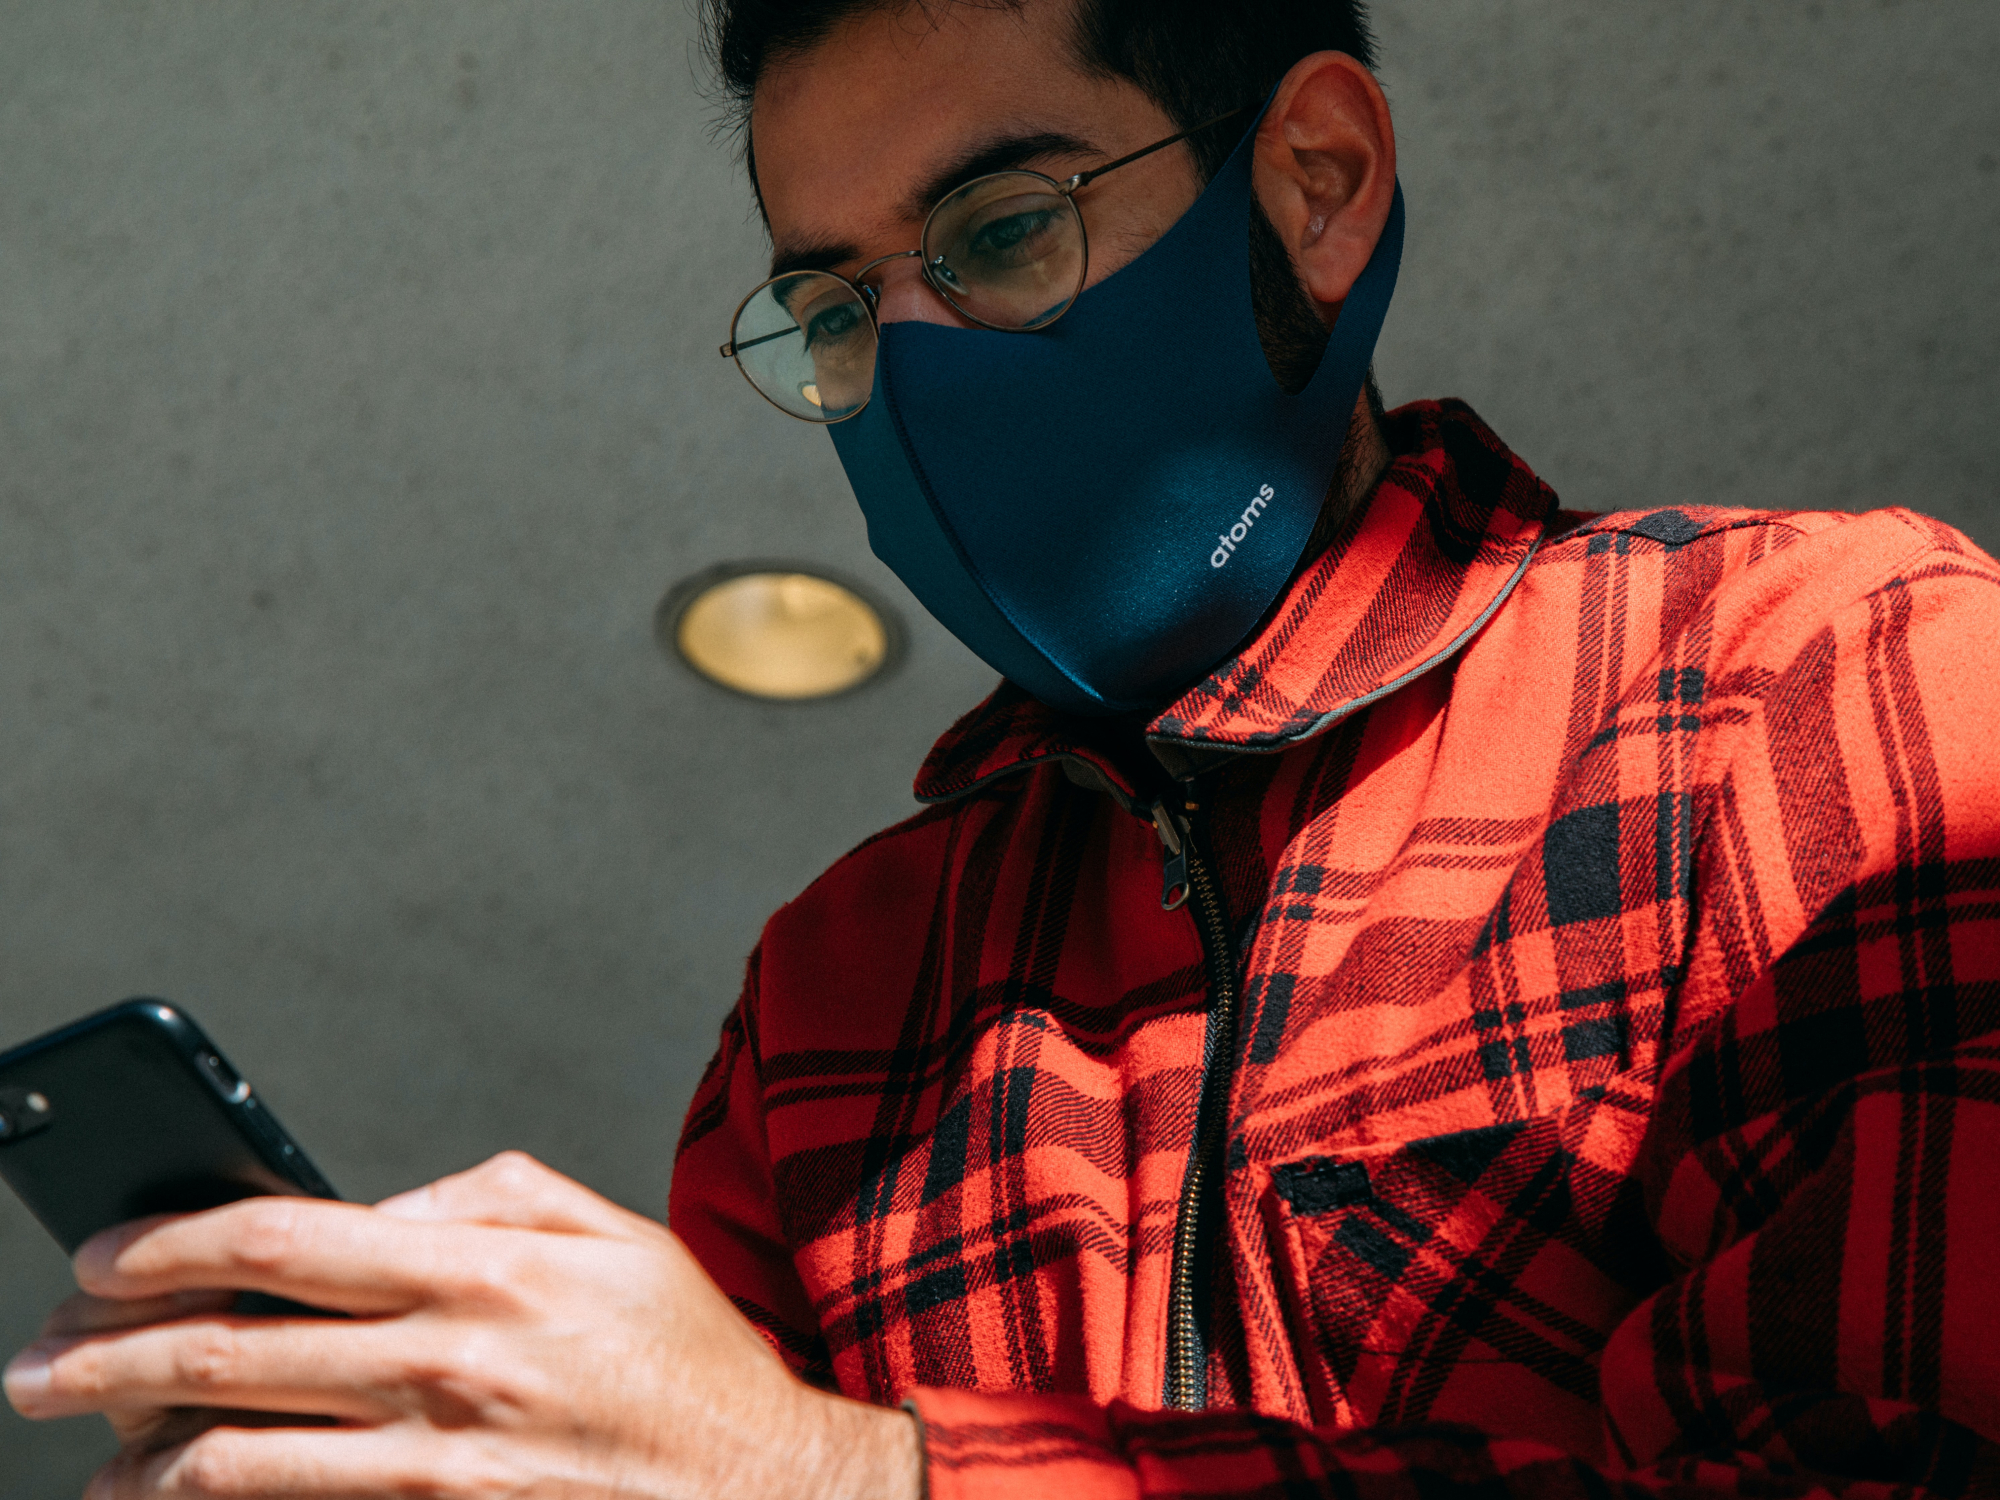 A person using their phone while wearing a face mask and wearing a red plaid shirt.